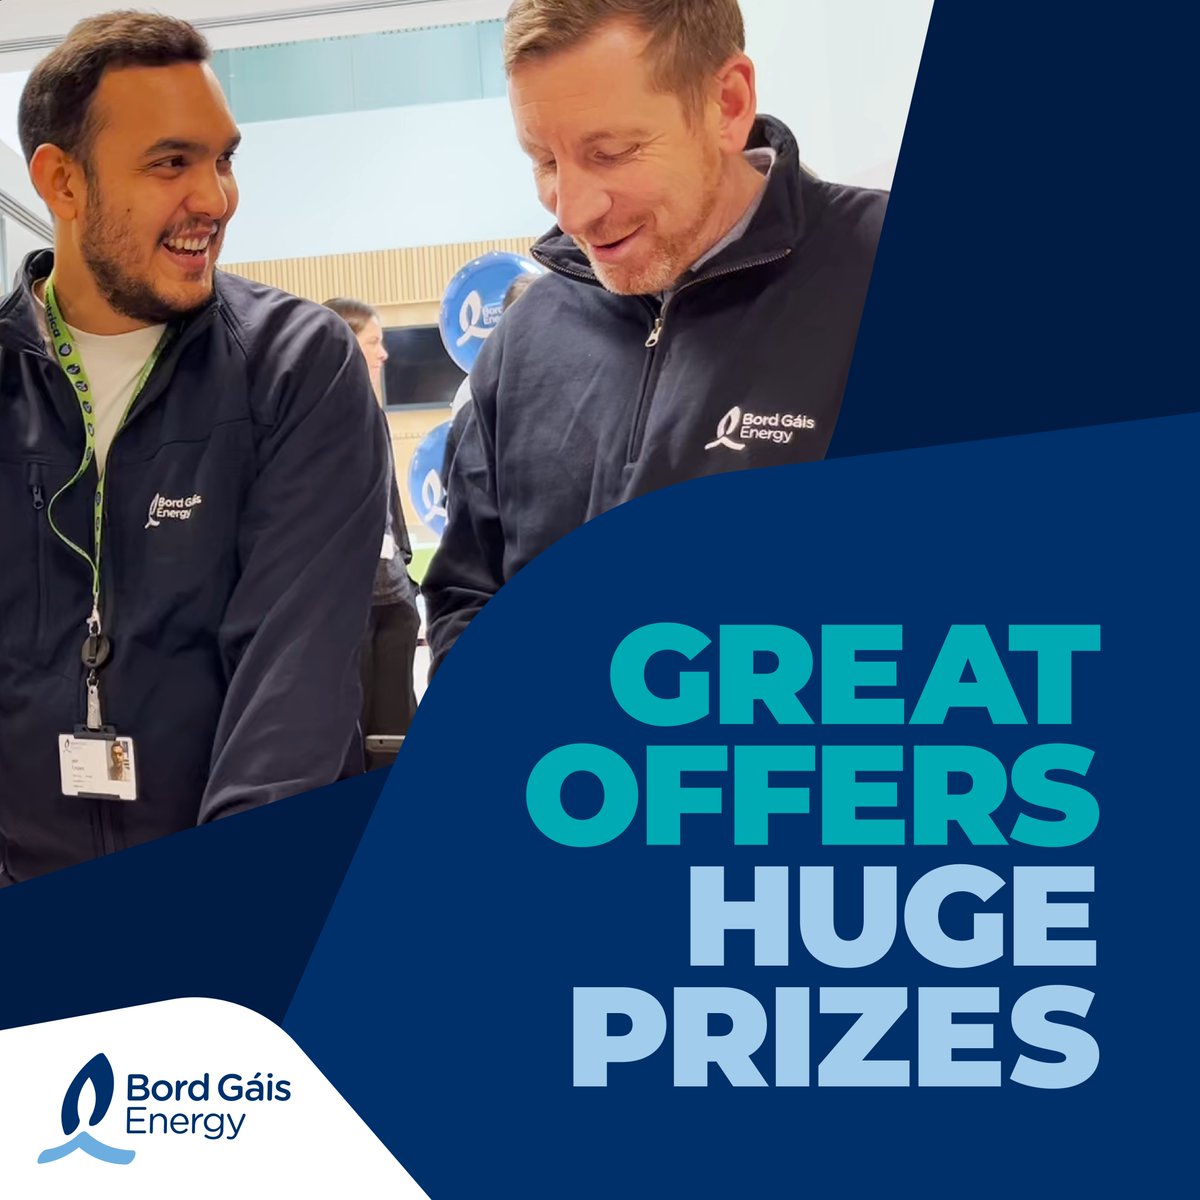 We’re giving away FREE ENERGY FOR A YEAR to one lucky winner at this weekend’s Ideal Home Show 💙 Enter the draw by signing up to one of our discounted energy plans at the event 🙌 Visit us at the RDS Simmonscourt from April 26-28 (stands S10 and R10) to learn about energy